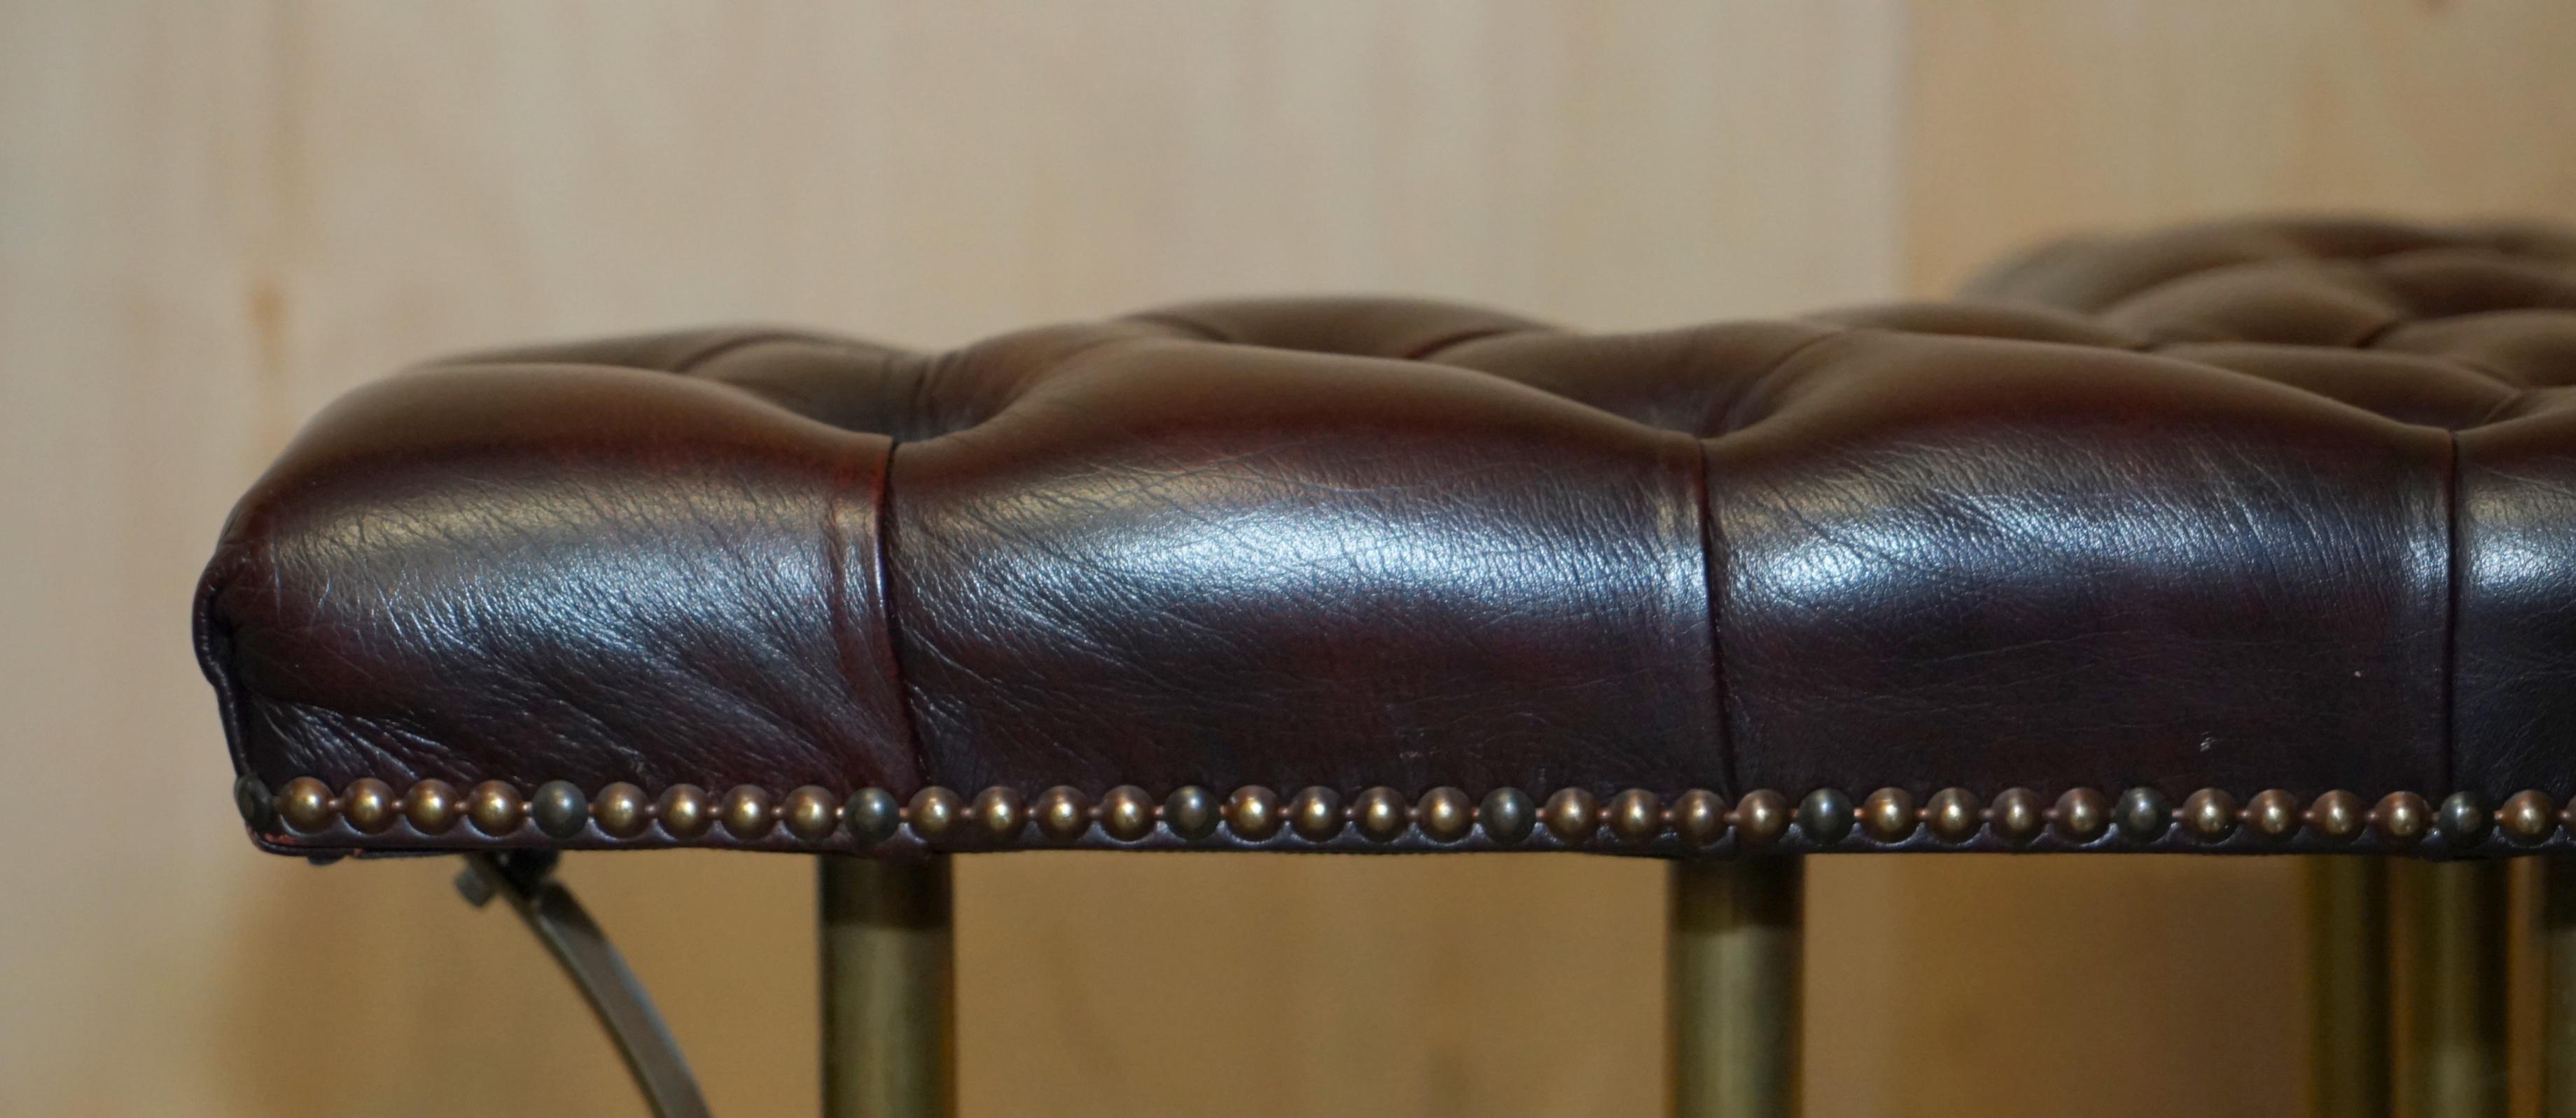 CHESTERFIELD TUFTED OXBLOOD LEATHER SOLID BRASS ANTiQUE VICTORIAN CLUB FENDER 5